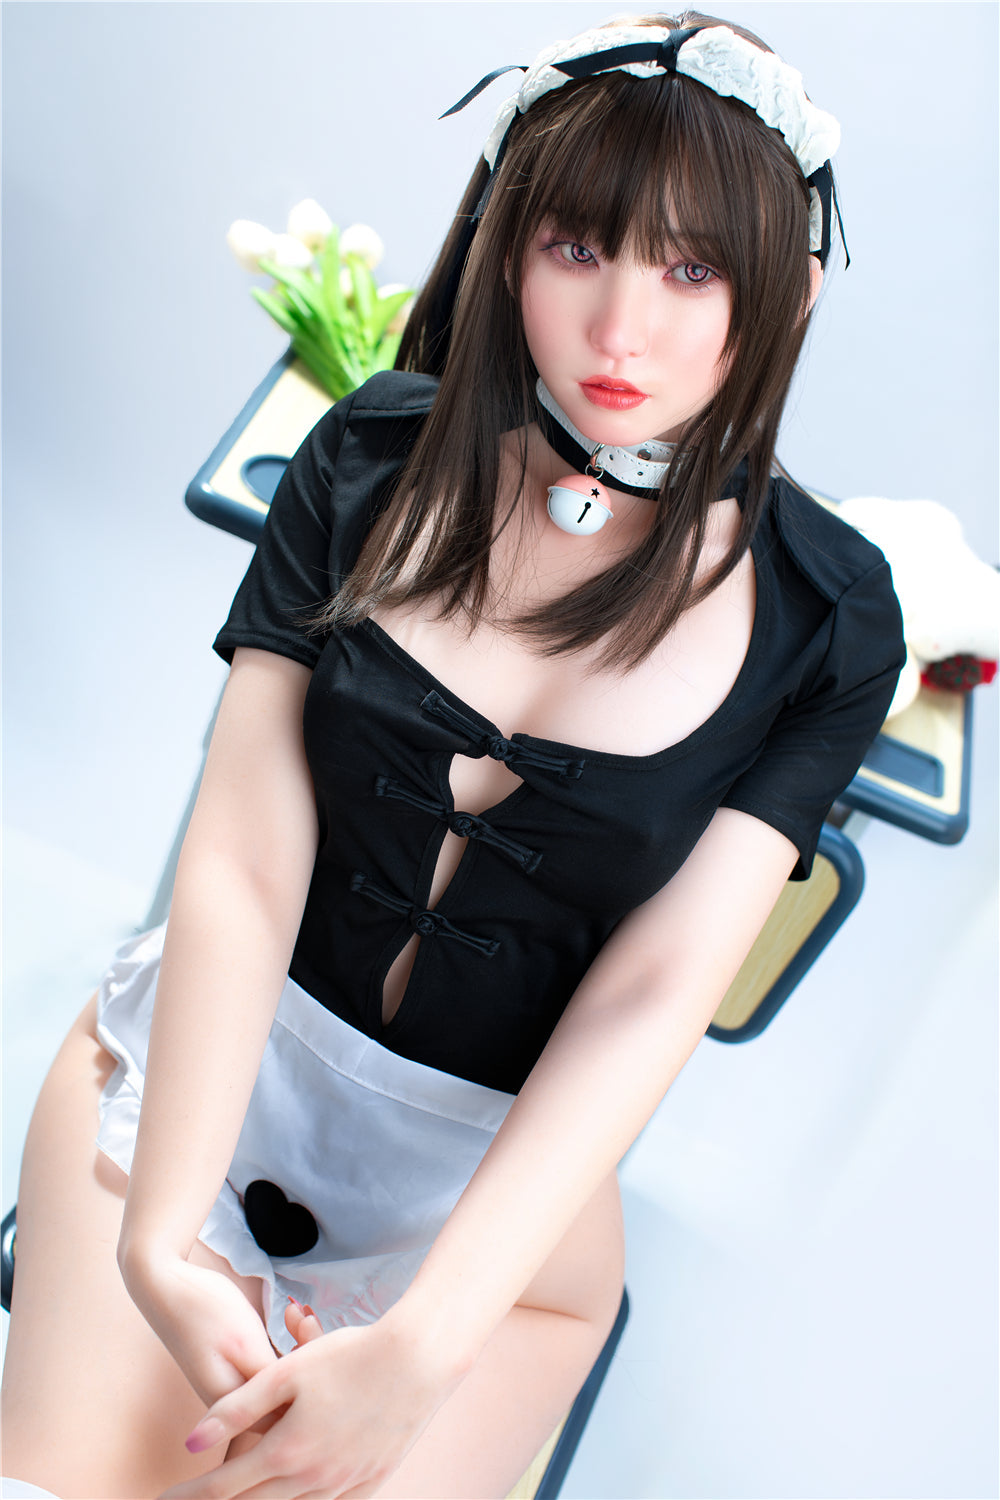 Irontech - Silicone Realistic Love Doll - 5ft 5in (166cm) - Lena - Love Dolls 4U